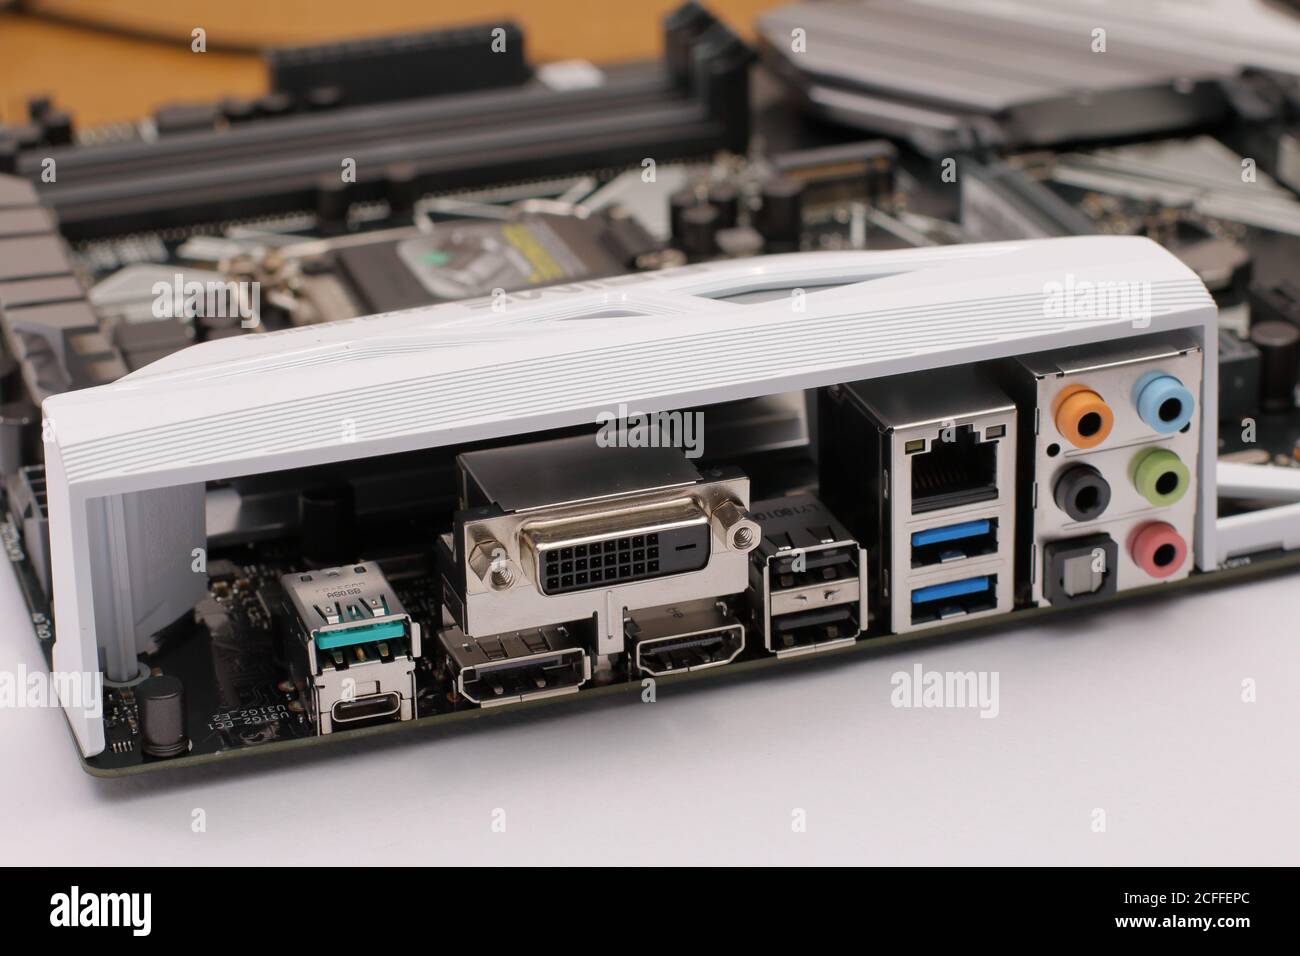 Buenos Aires, Argentina - August 2,2019: Input and output ports on the back panel of a motherboard. Stock Photo